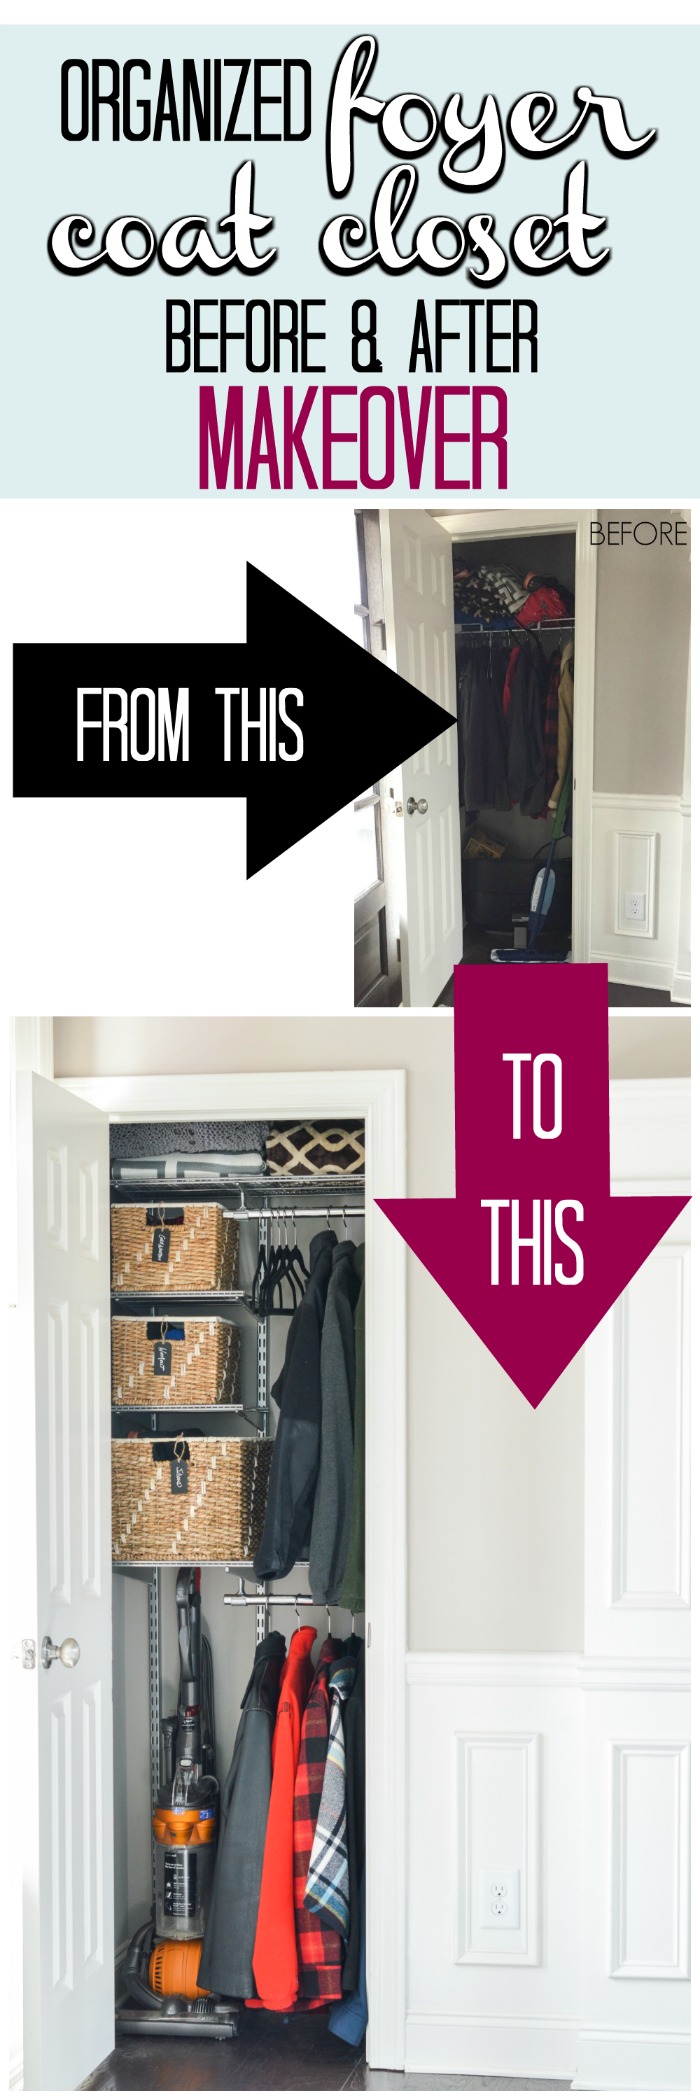 https://kelleynan.com/wp-content/uploads/2017/02/Organized-Foyer-Coat-Closet-Before-and-After-Makeover-Double-Hanging-Bar-with-Baskets-in-Entry.jpg